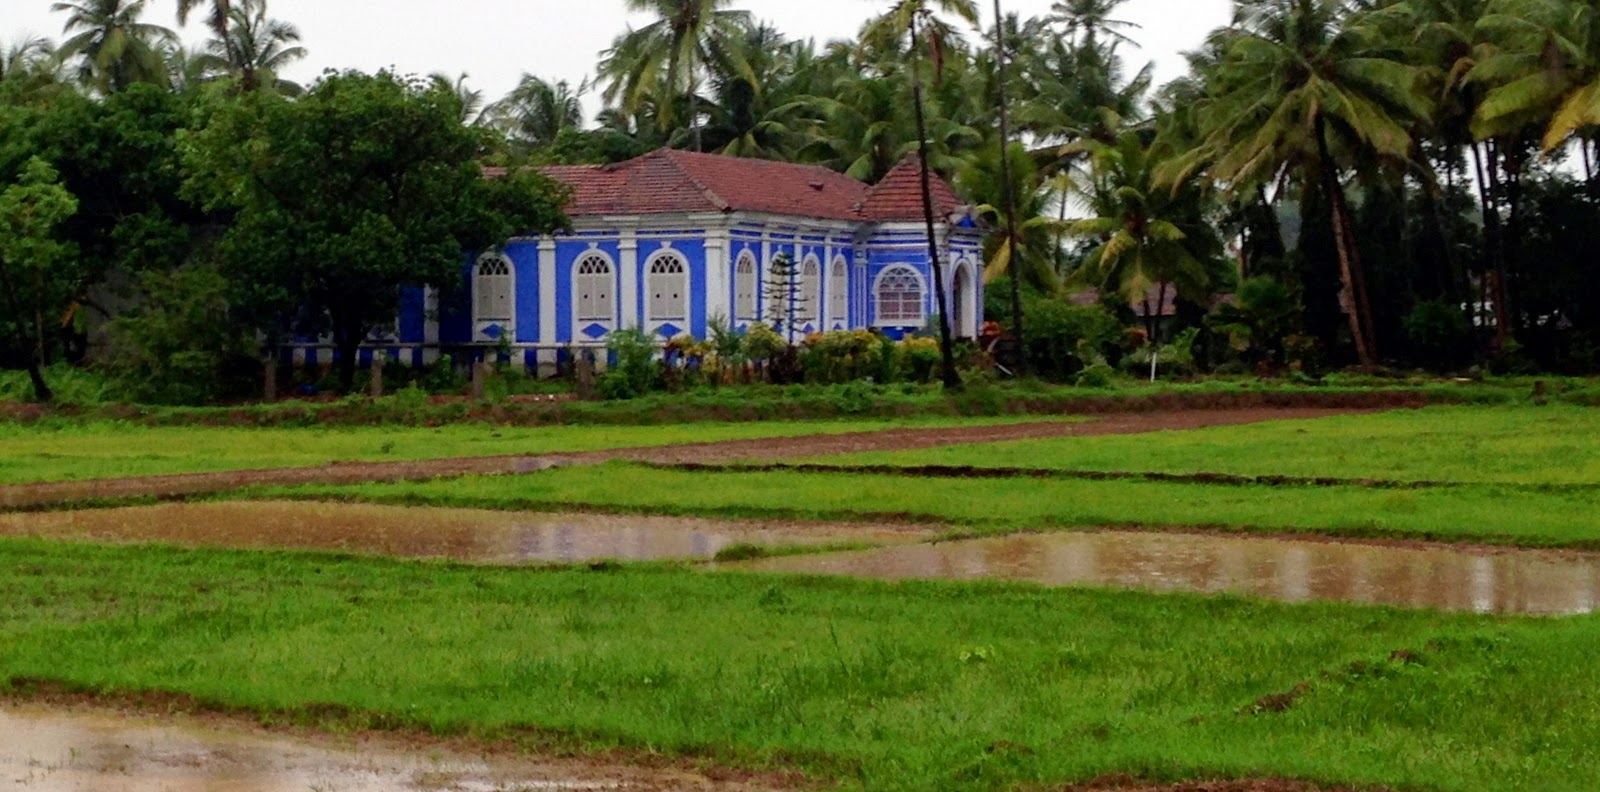 A Portuguese bungalow in Goa. We loved the contrast in this picture.